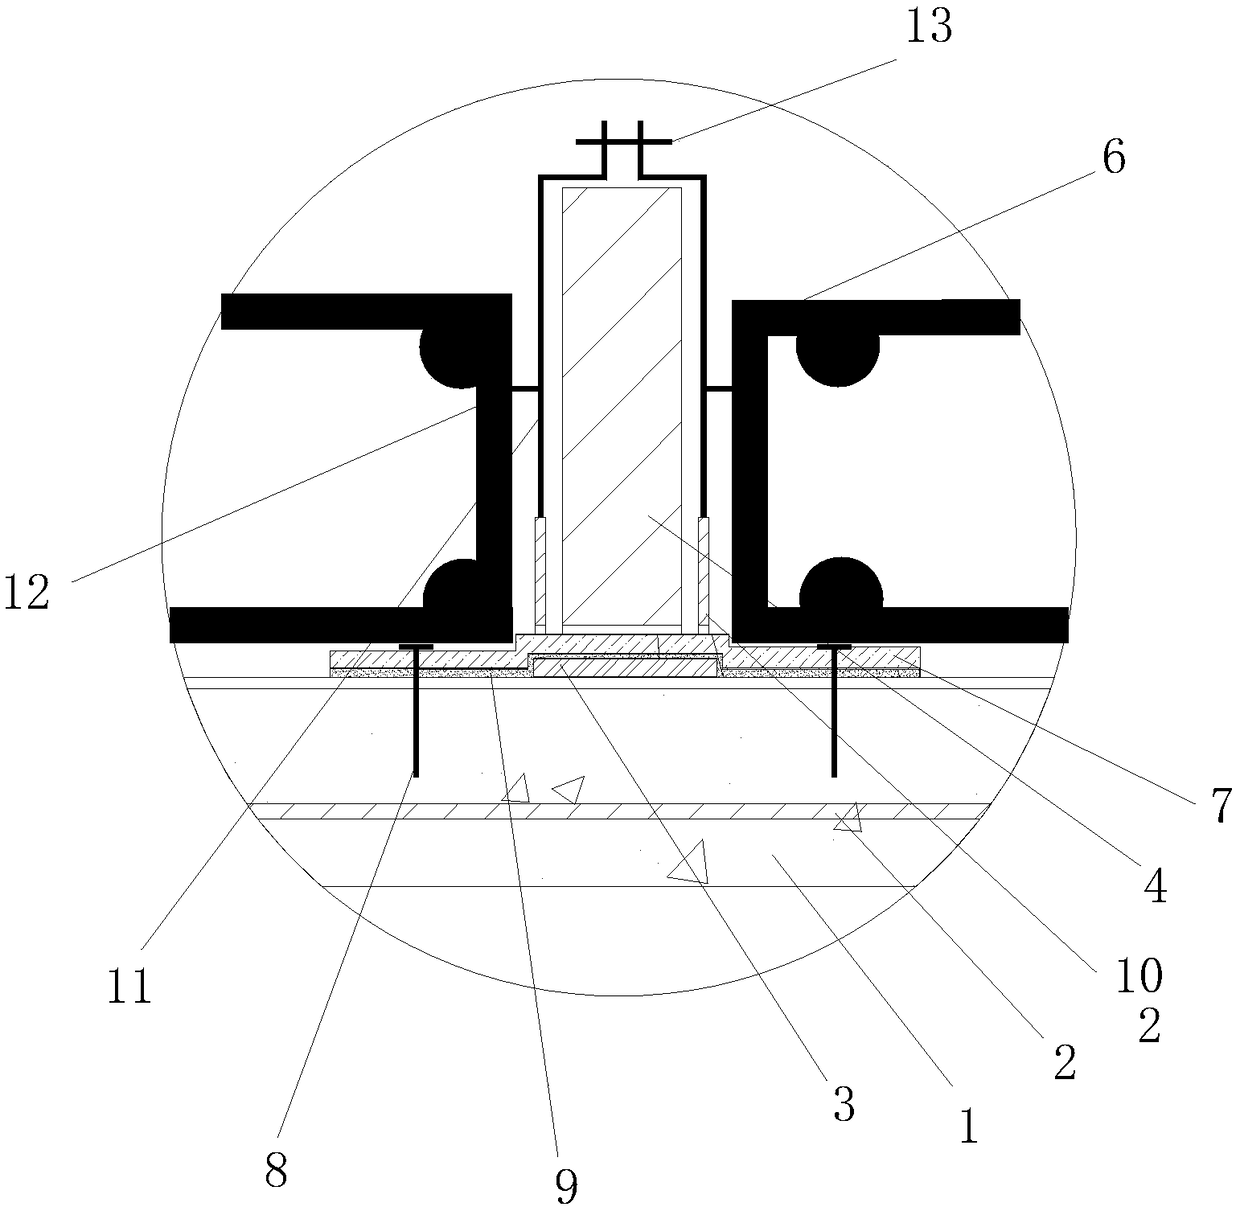 Construction method for isolating reserved foundation slab post-cast strip